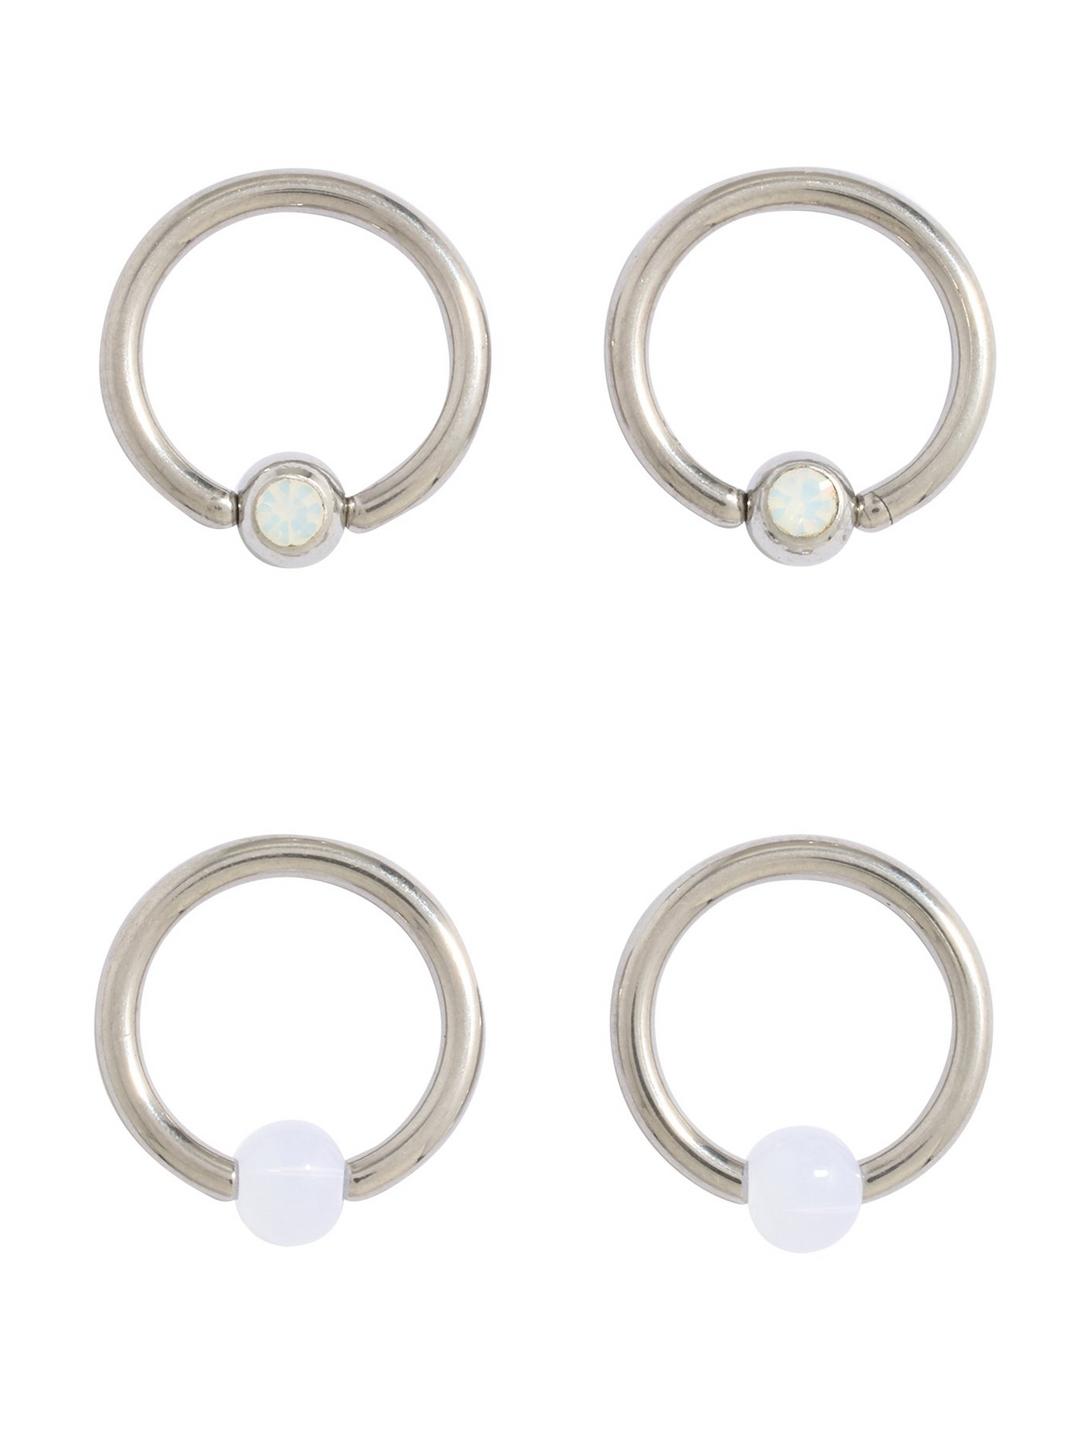 Steel Synthetic Opal Ball Captive Hoop 4 Pack, SILVER, hi-res